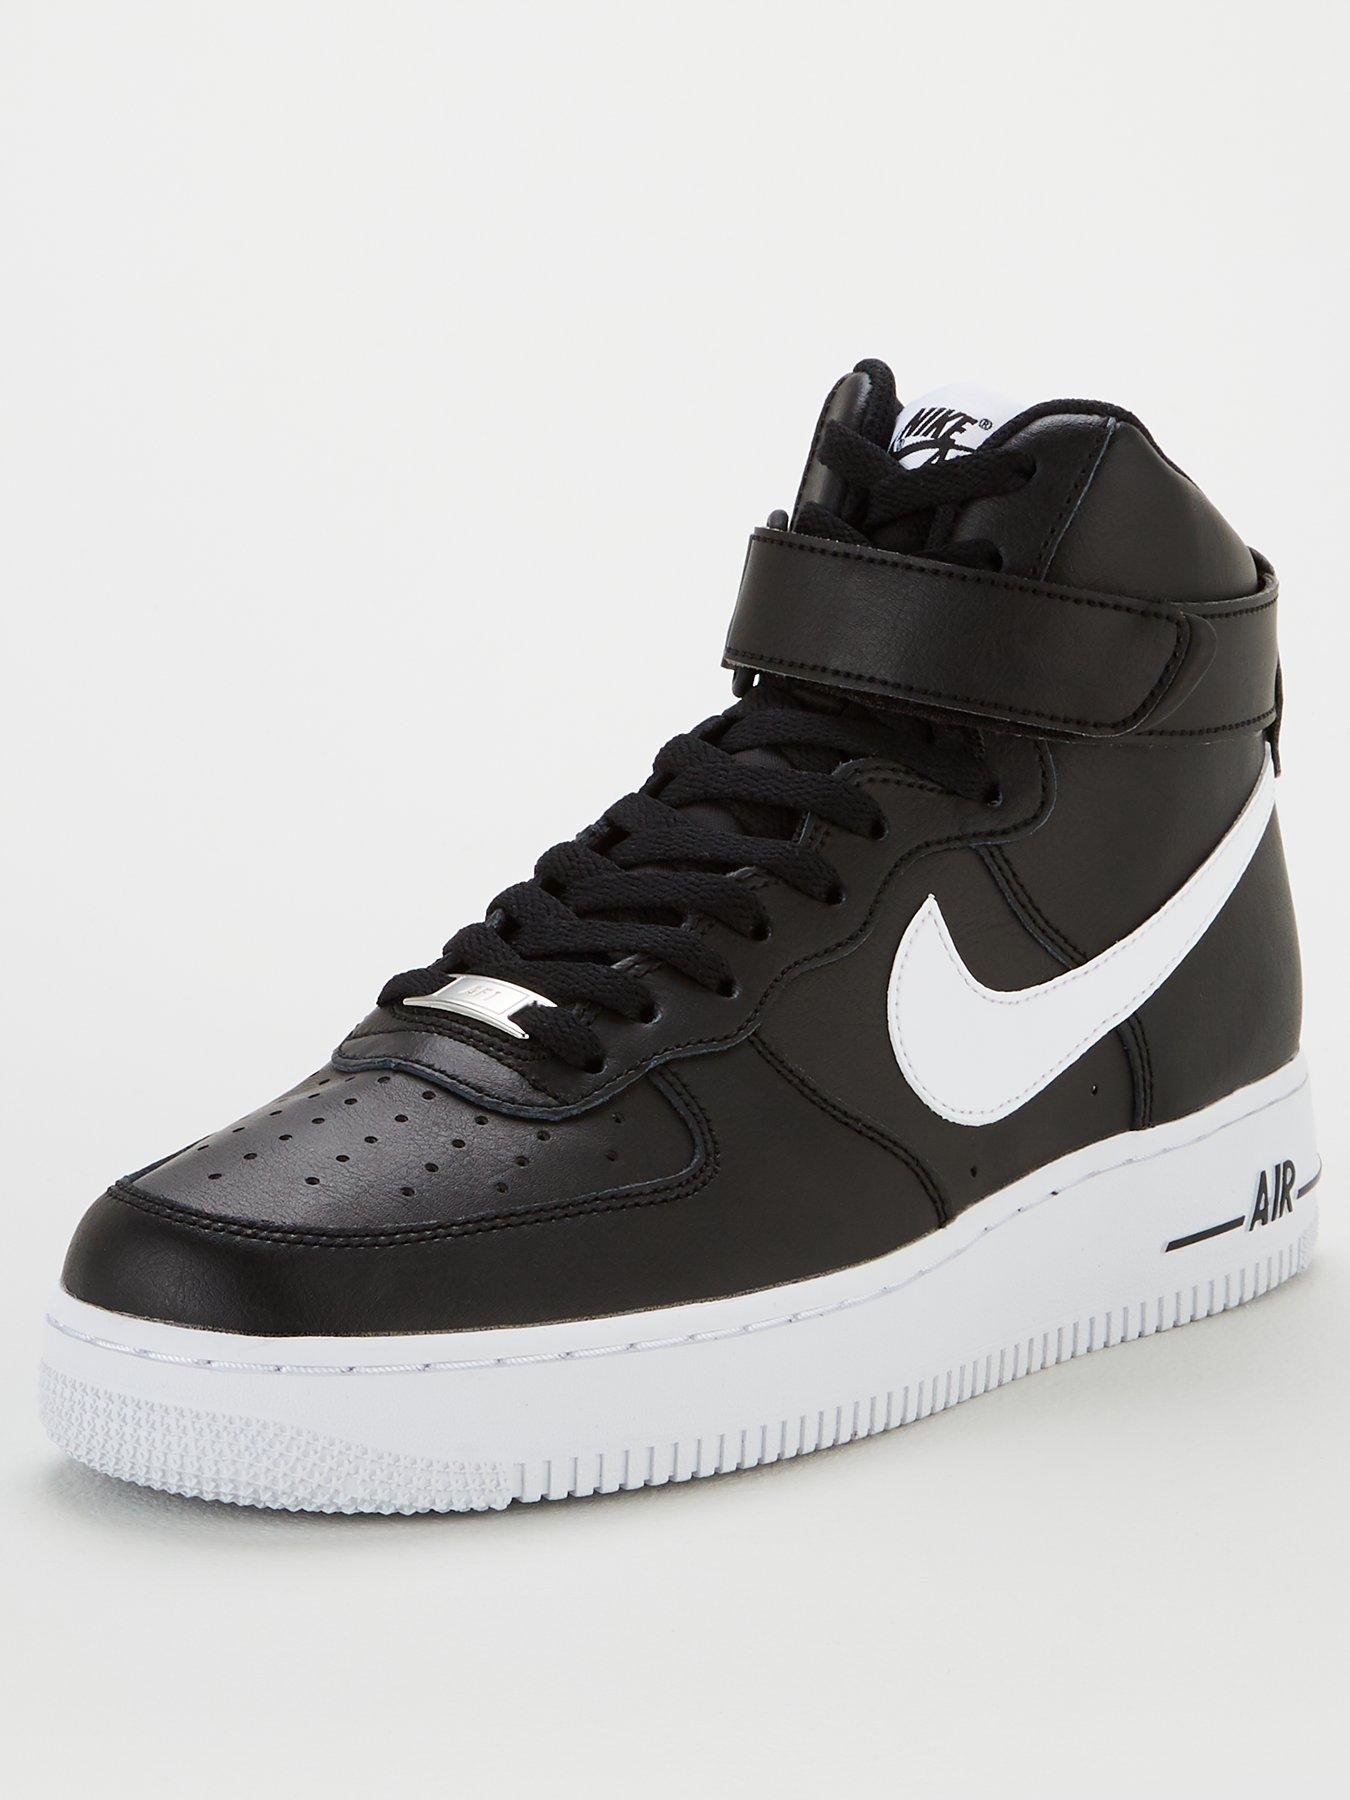 size 6 air force 1 black